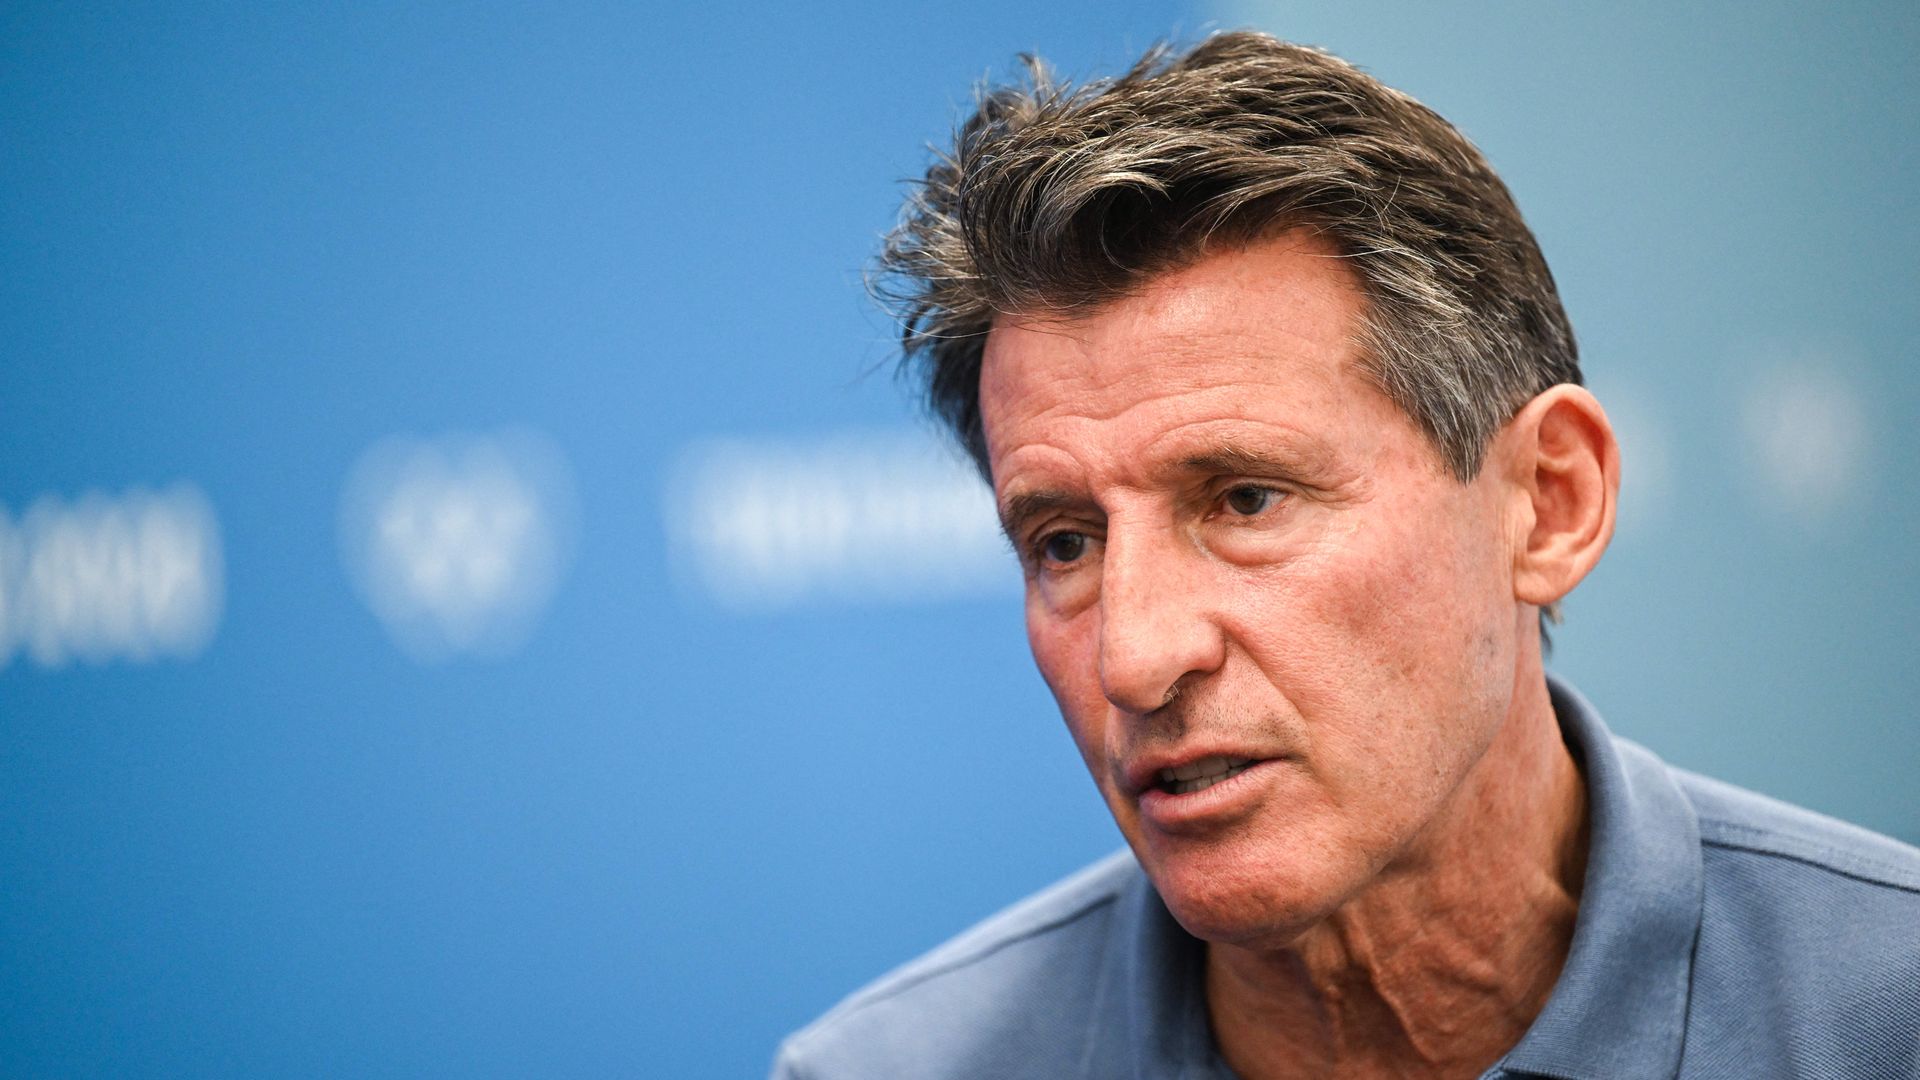 World Athletics chief Sebastian Coe speaks during an interview with AFP at the Main Press Centre (MPC) of the Tokyo 2020 Olympic Games in Tokyo on July 27, 2021.